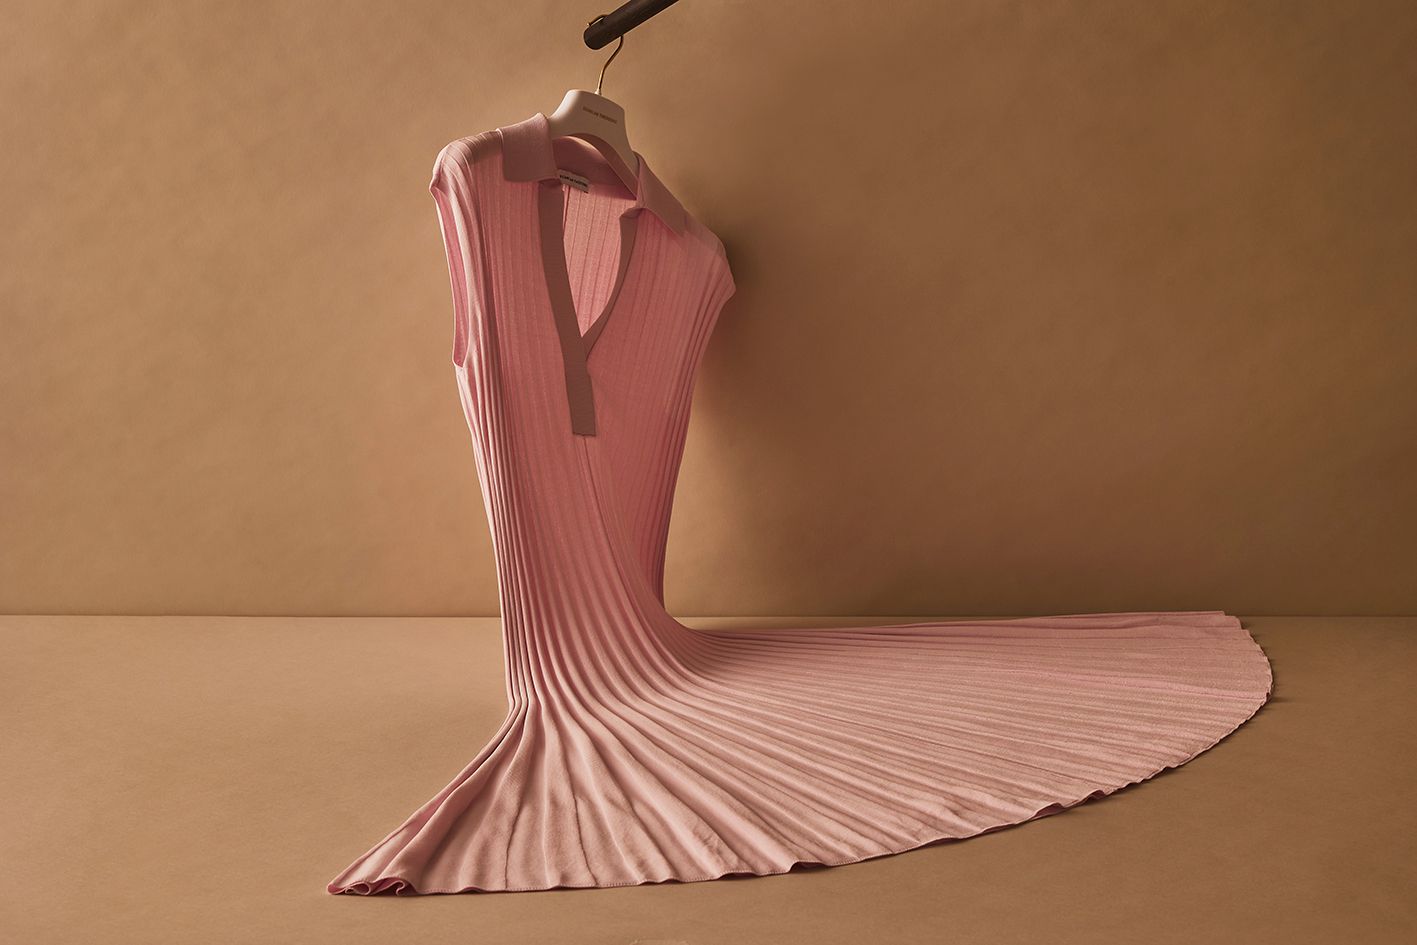 Scanlan Theodore pink pleated rib dress hanging in a fanned formation.